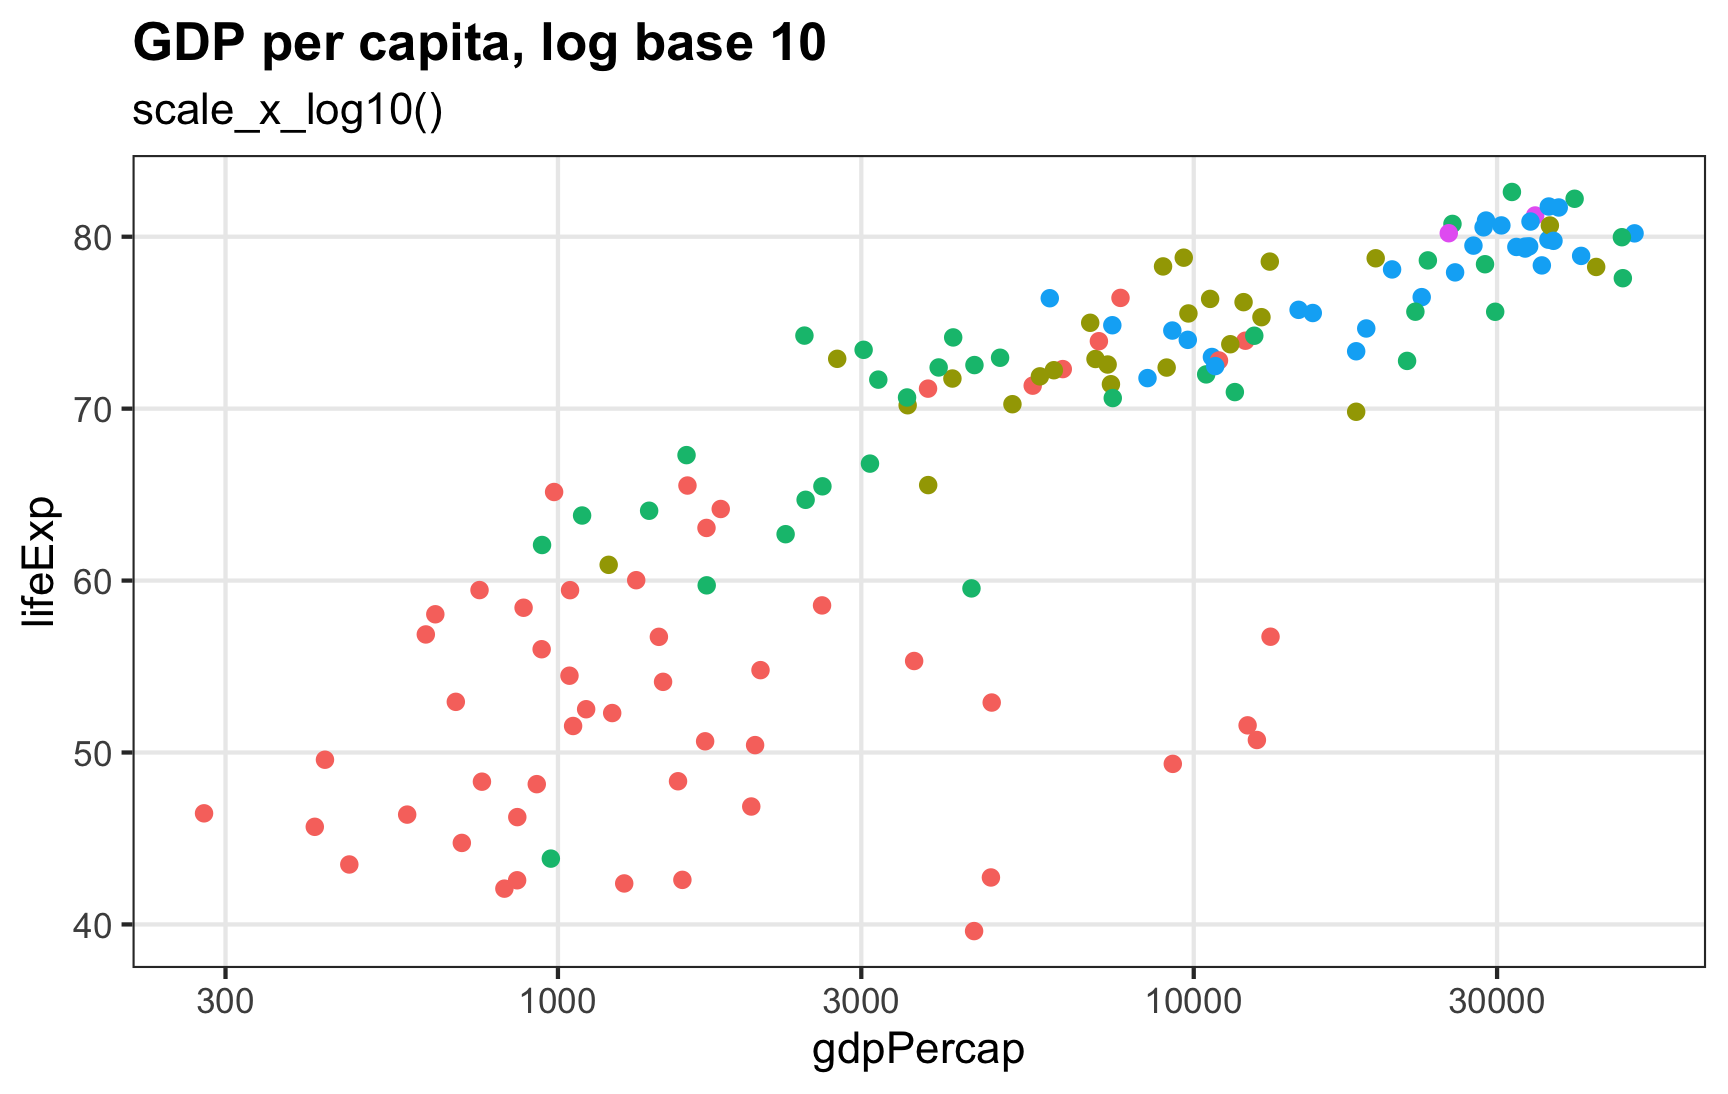 The x-axis now shows GDP per capita scaled to log base 10, with axis breaks at 300, 1000, 3000, 100000, and 30000. The relationship is much more linear now.